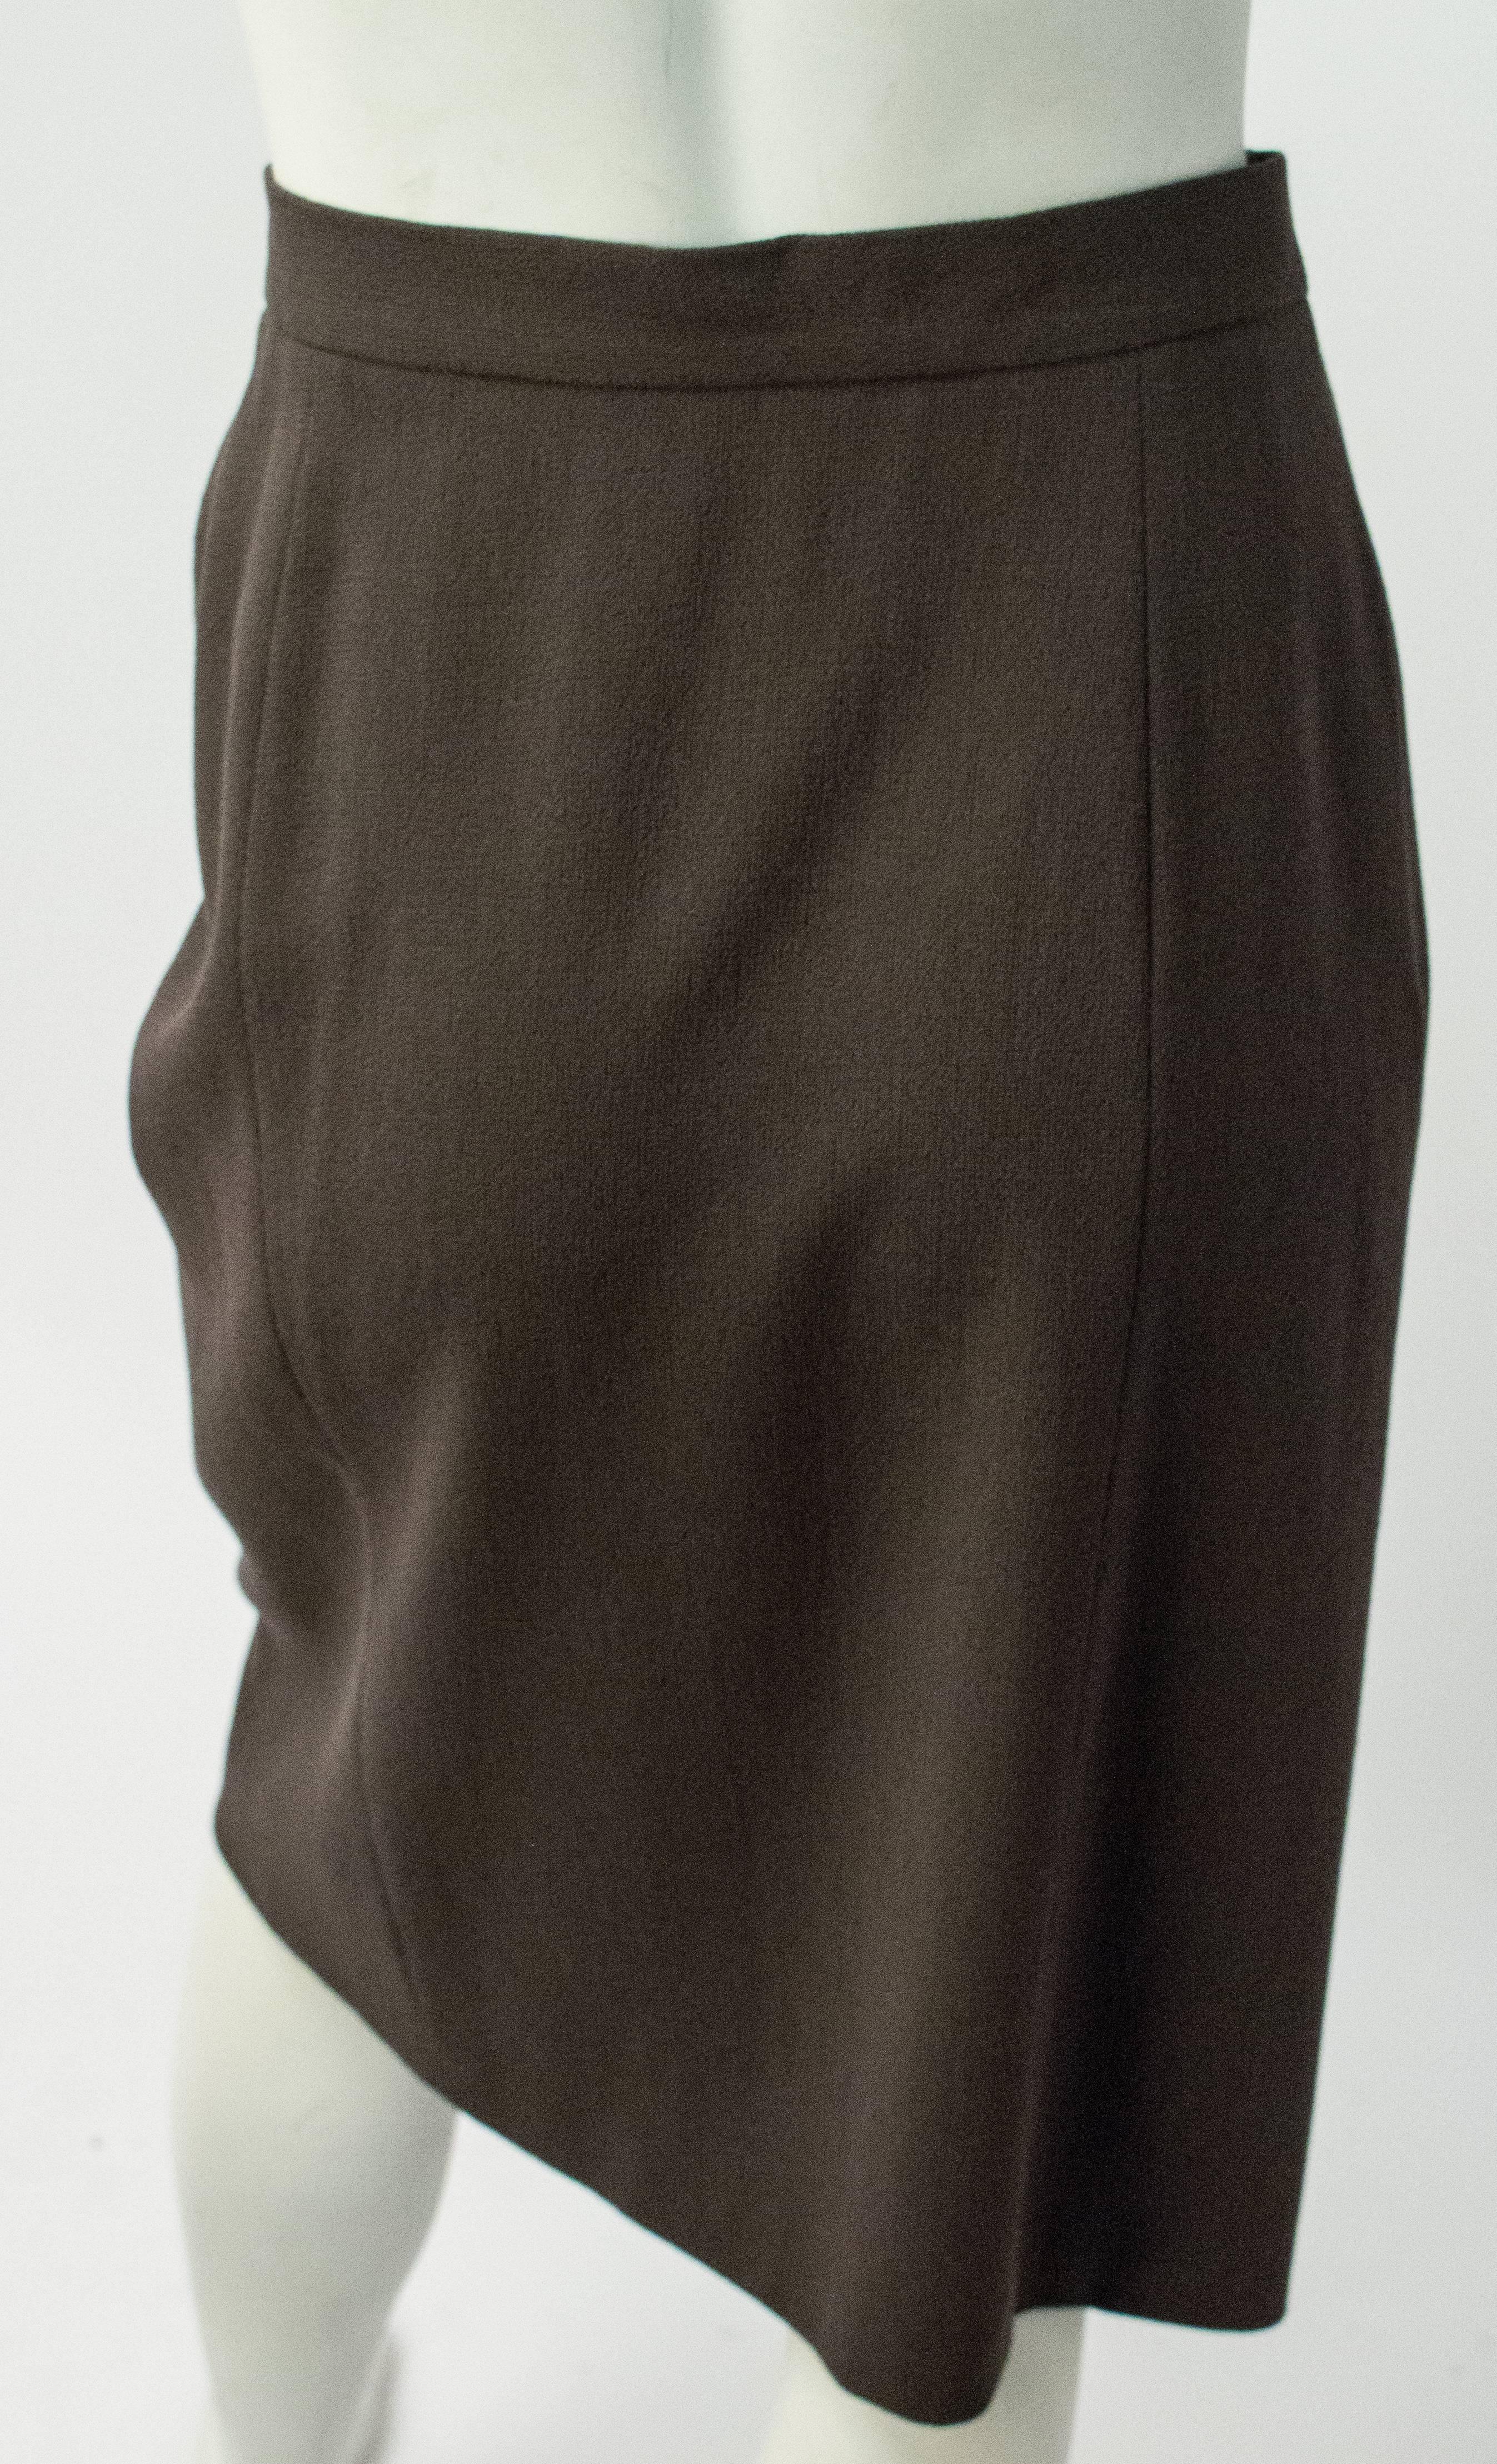 80s Wool Crepe Draped Skirt. Wraparound closure, fastens w/ buttons and velcro. Fully lined. 100% wool, made in Italy.